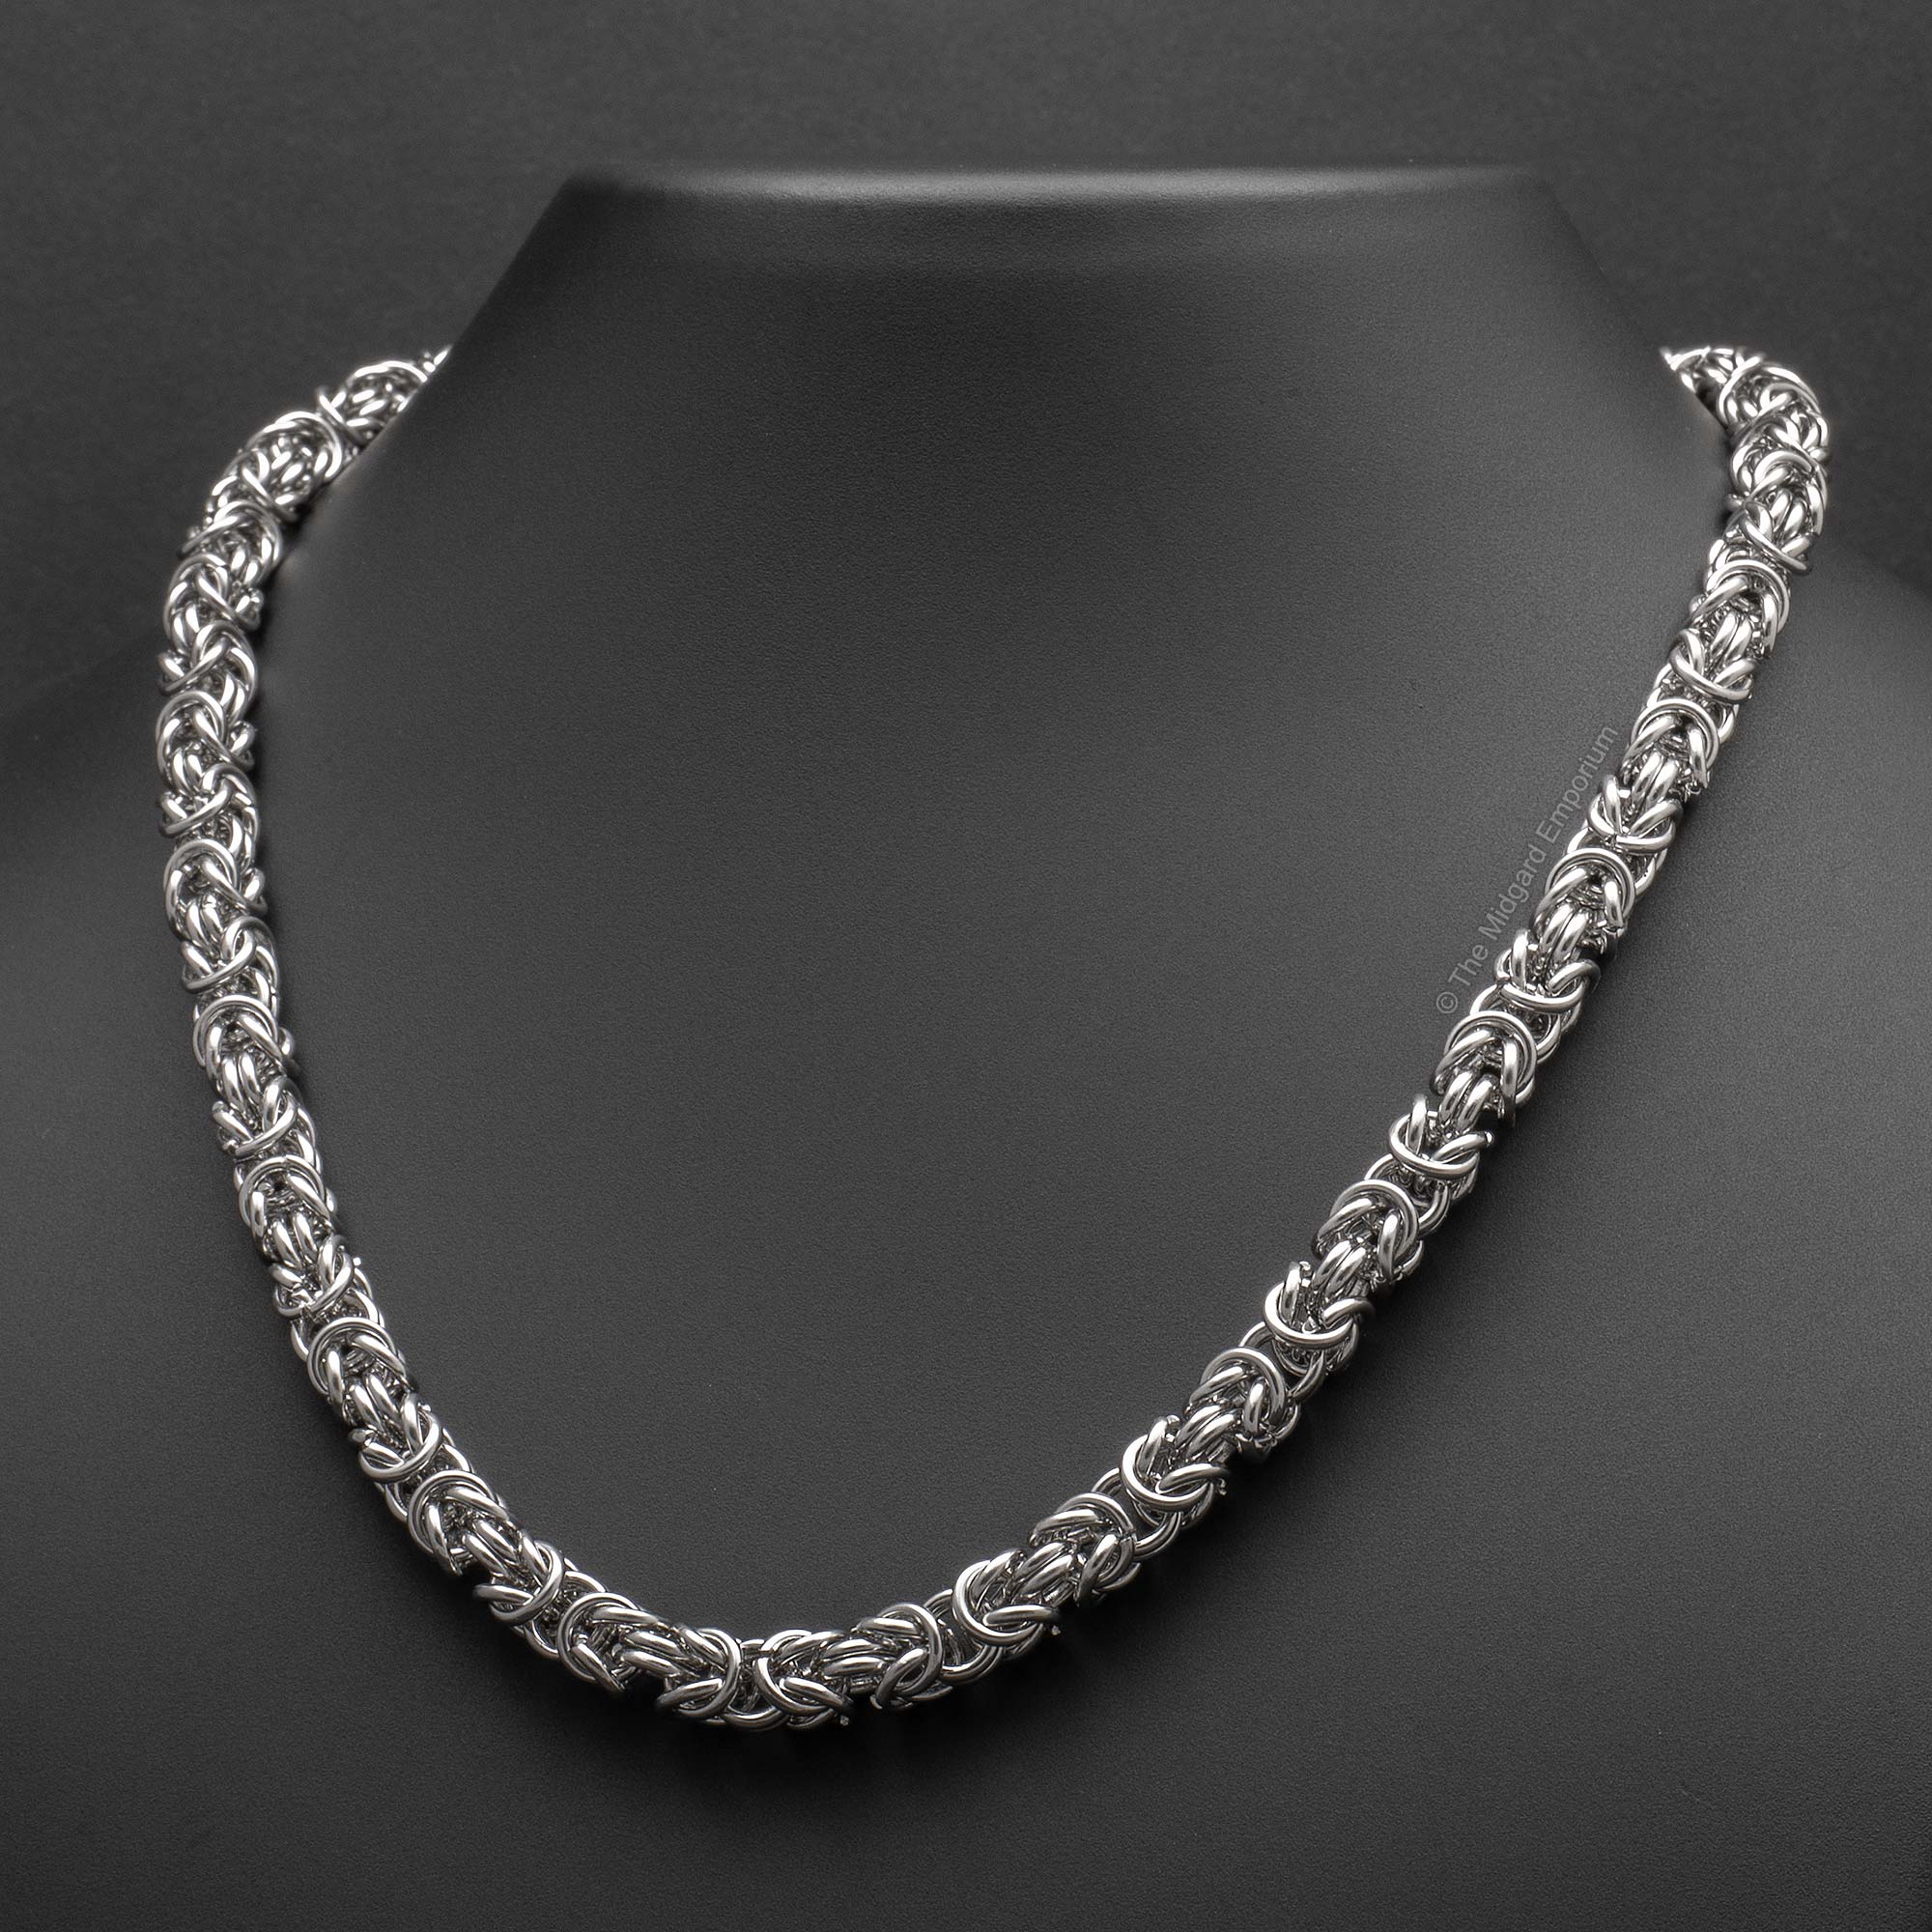 6mm Stainless Steel King Chain Necklace - The Midgard Emporium